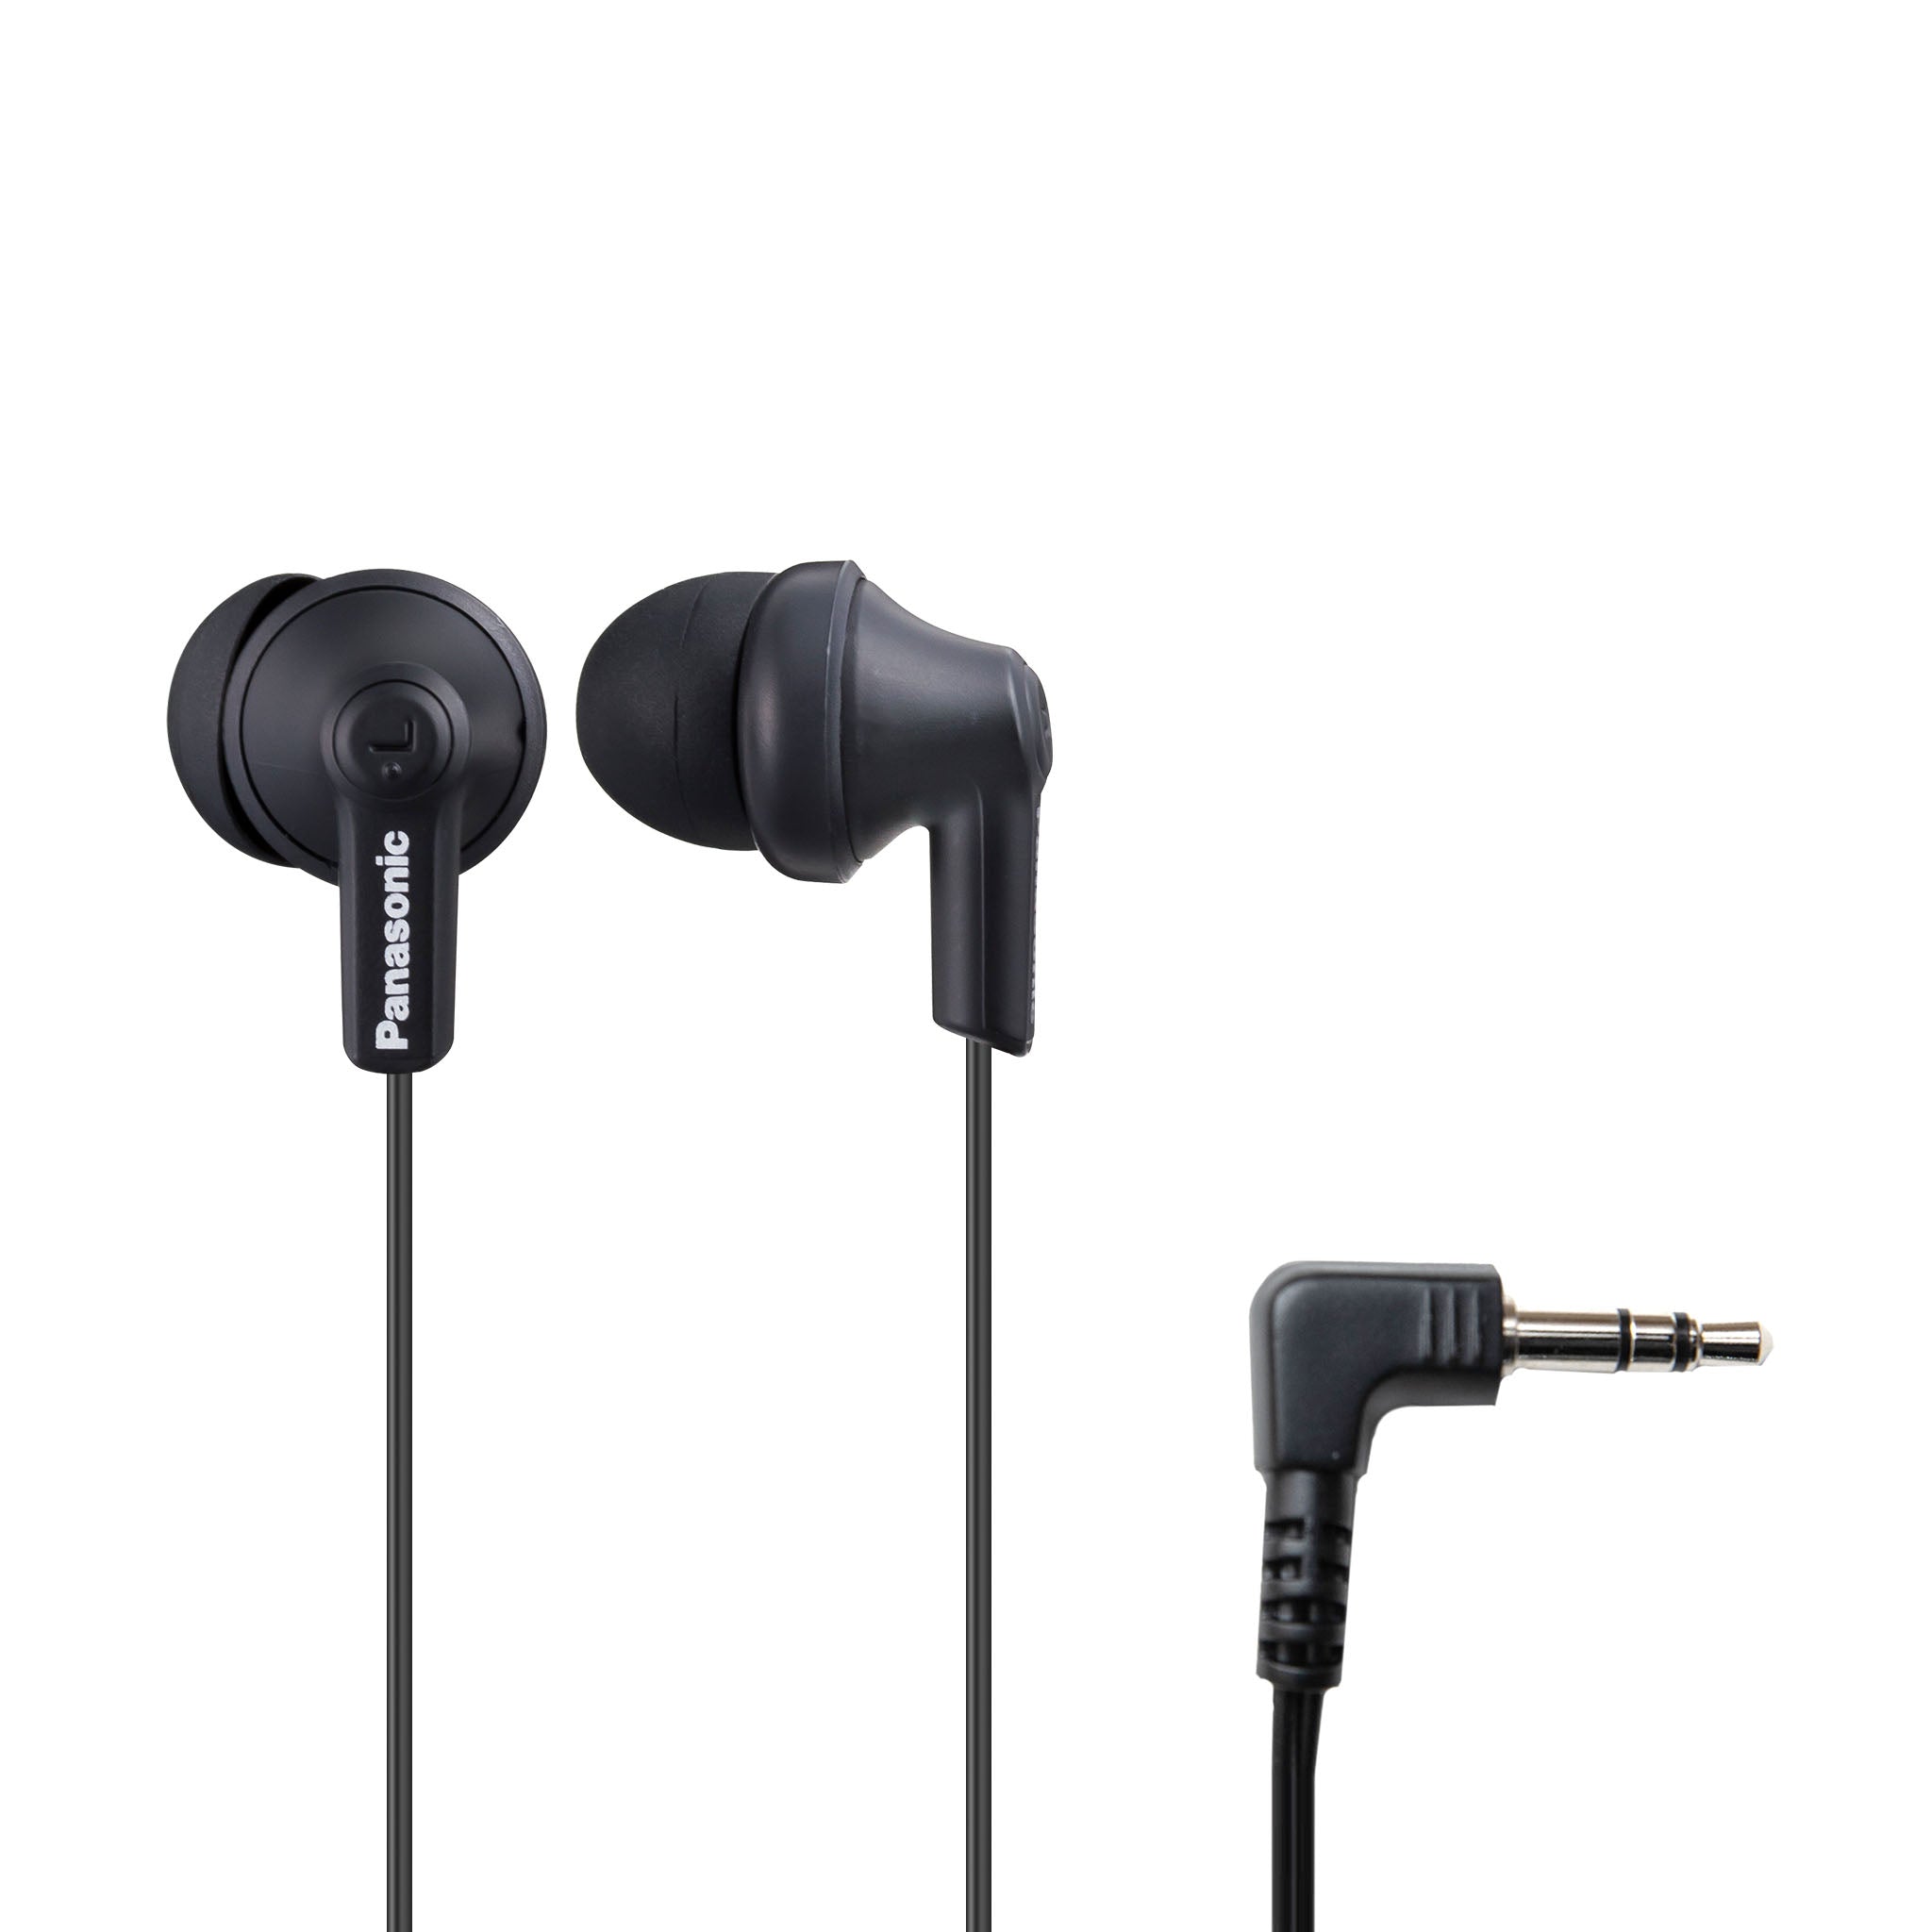 Panasonic ErgoFit In-Ear Earbud RP-HJE120 Phones - with Laptops 3.5mm Jack Headphones and for